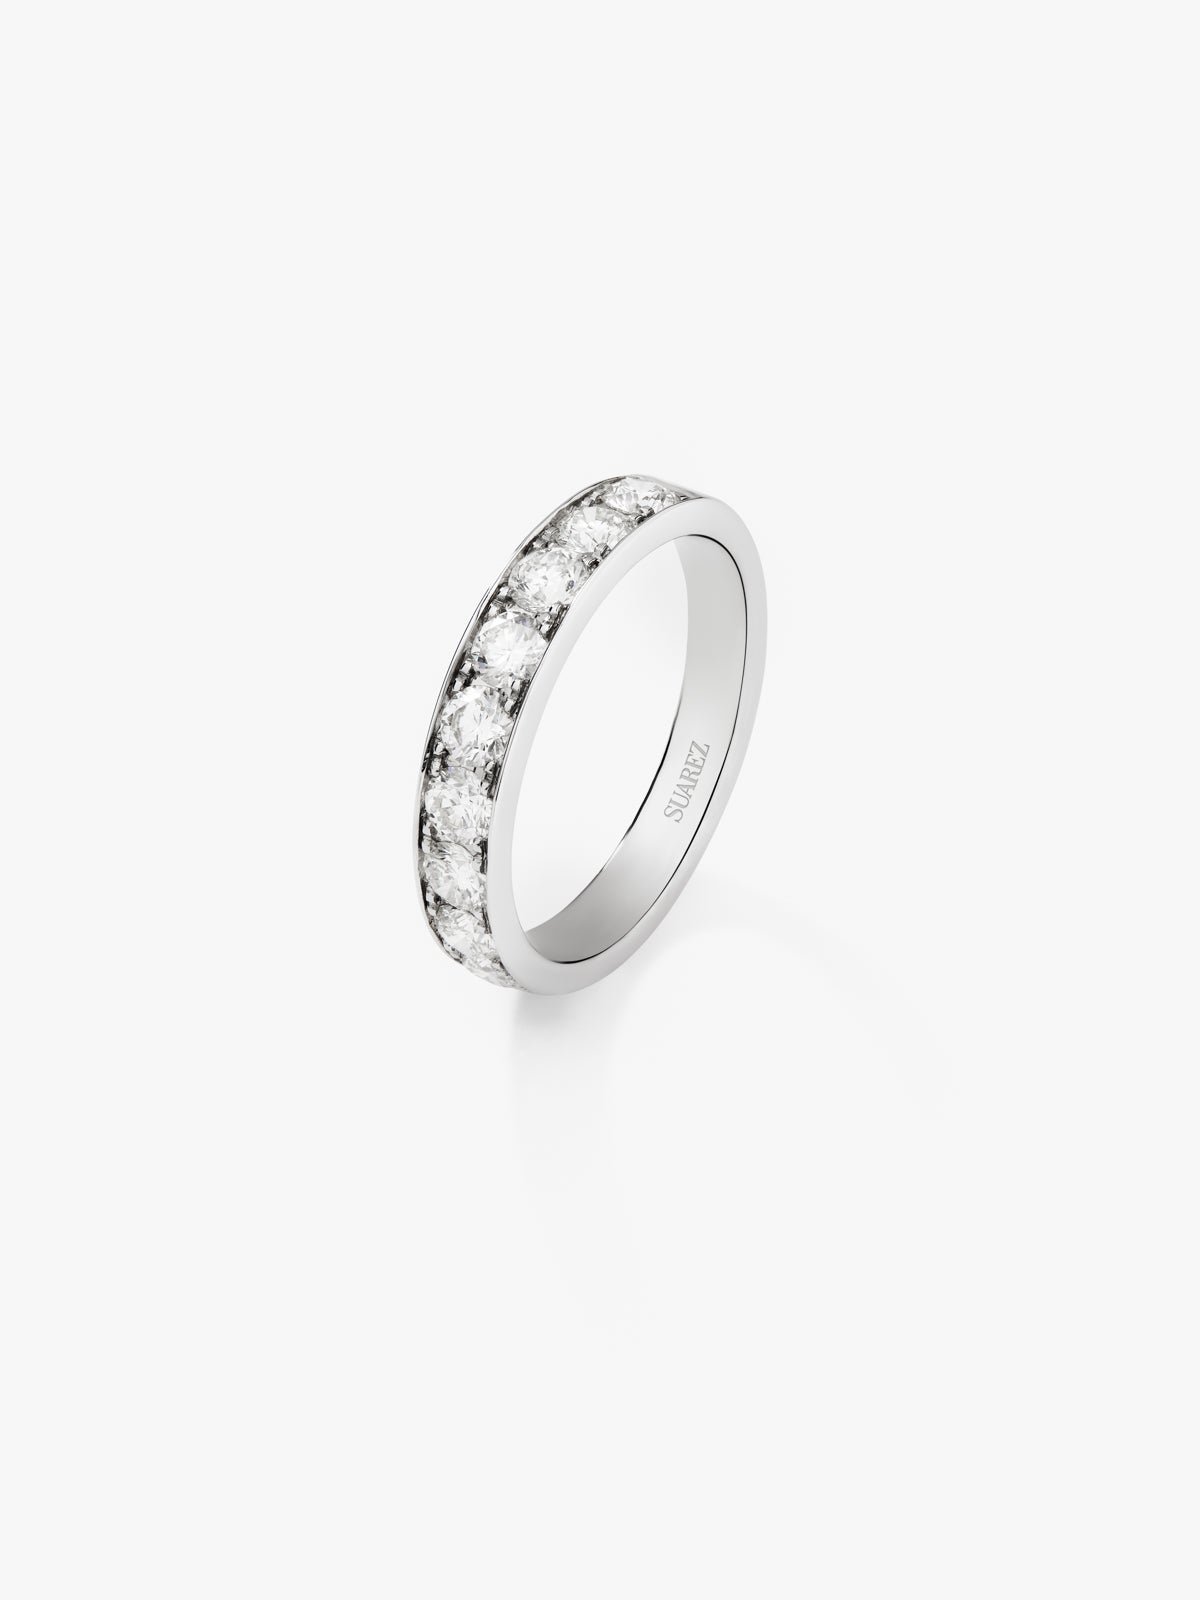 Half ring in 18K white gold with 9 brilliant-cut diamonds with a total of 0.9 cts